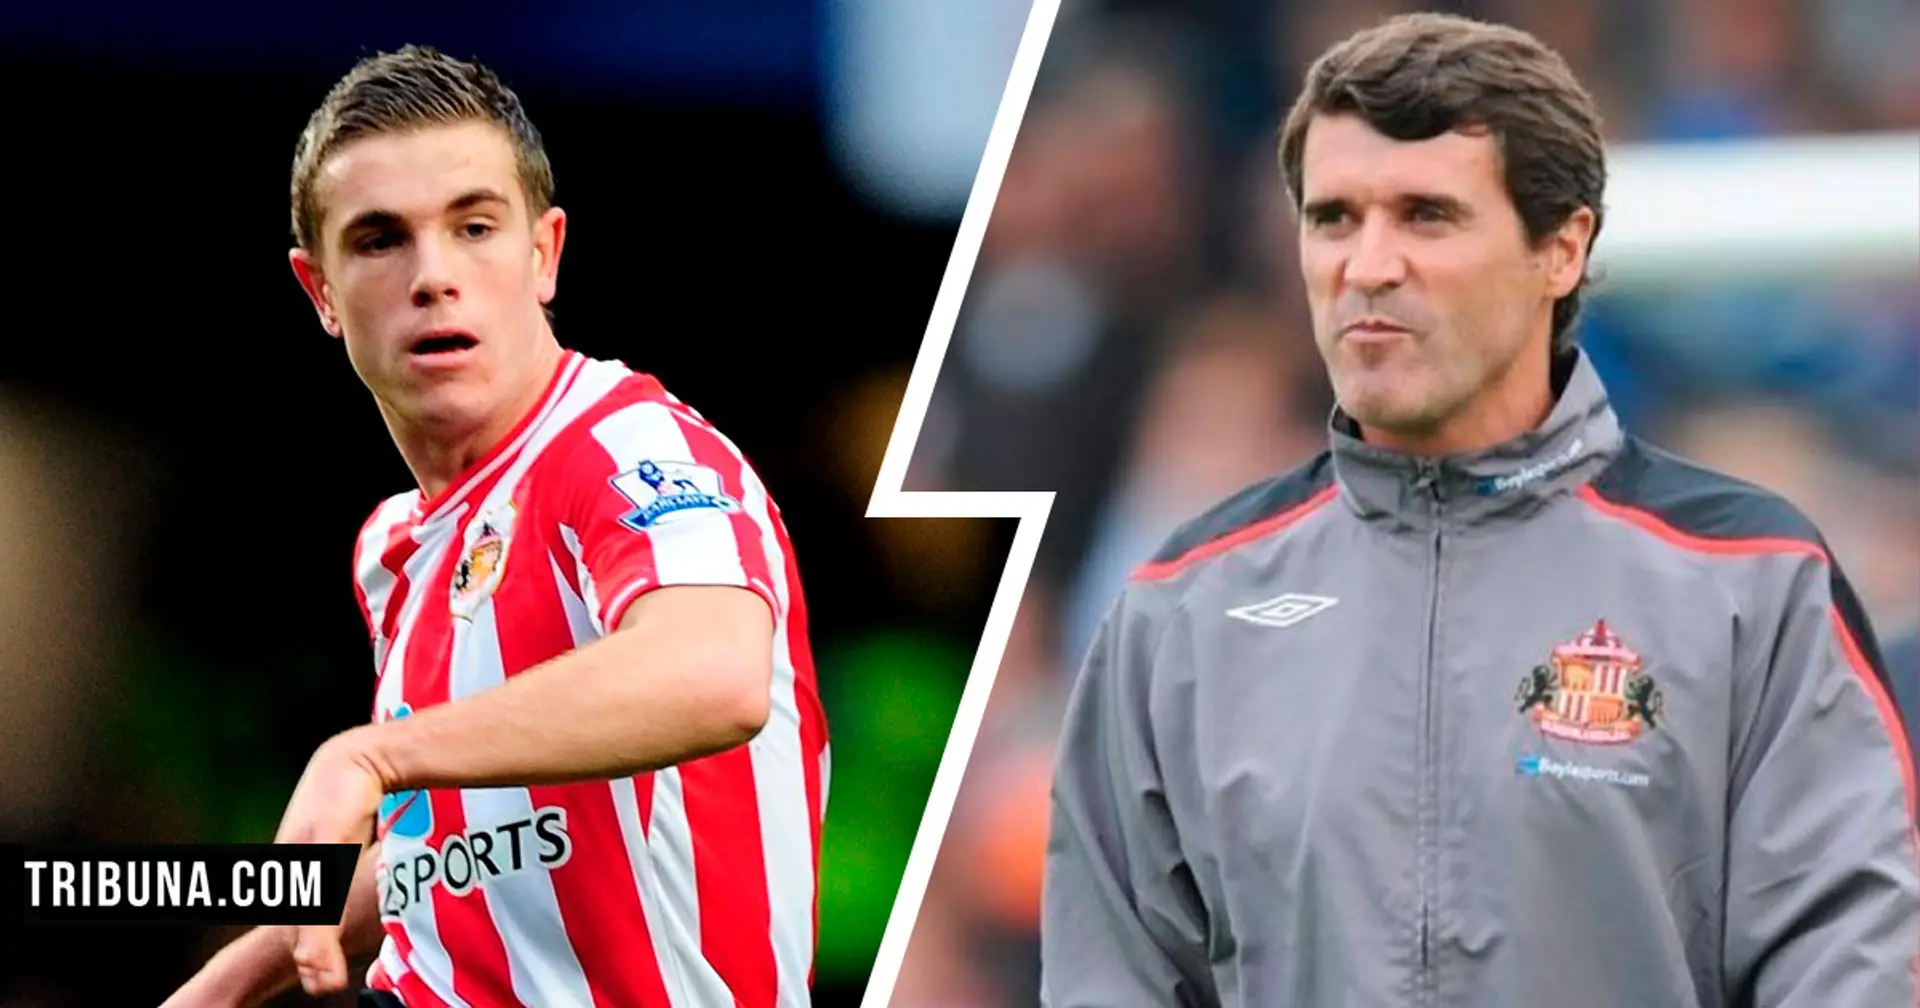 'I was young lad sweating and thinking 'please don't come to me': Hendo reveals Roy Keane's rant which kickstarted his career